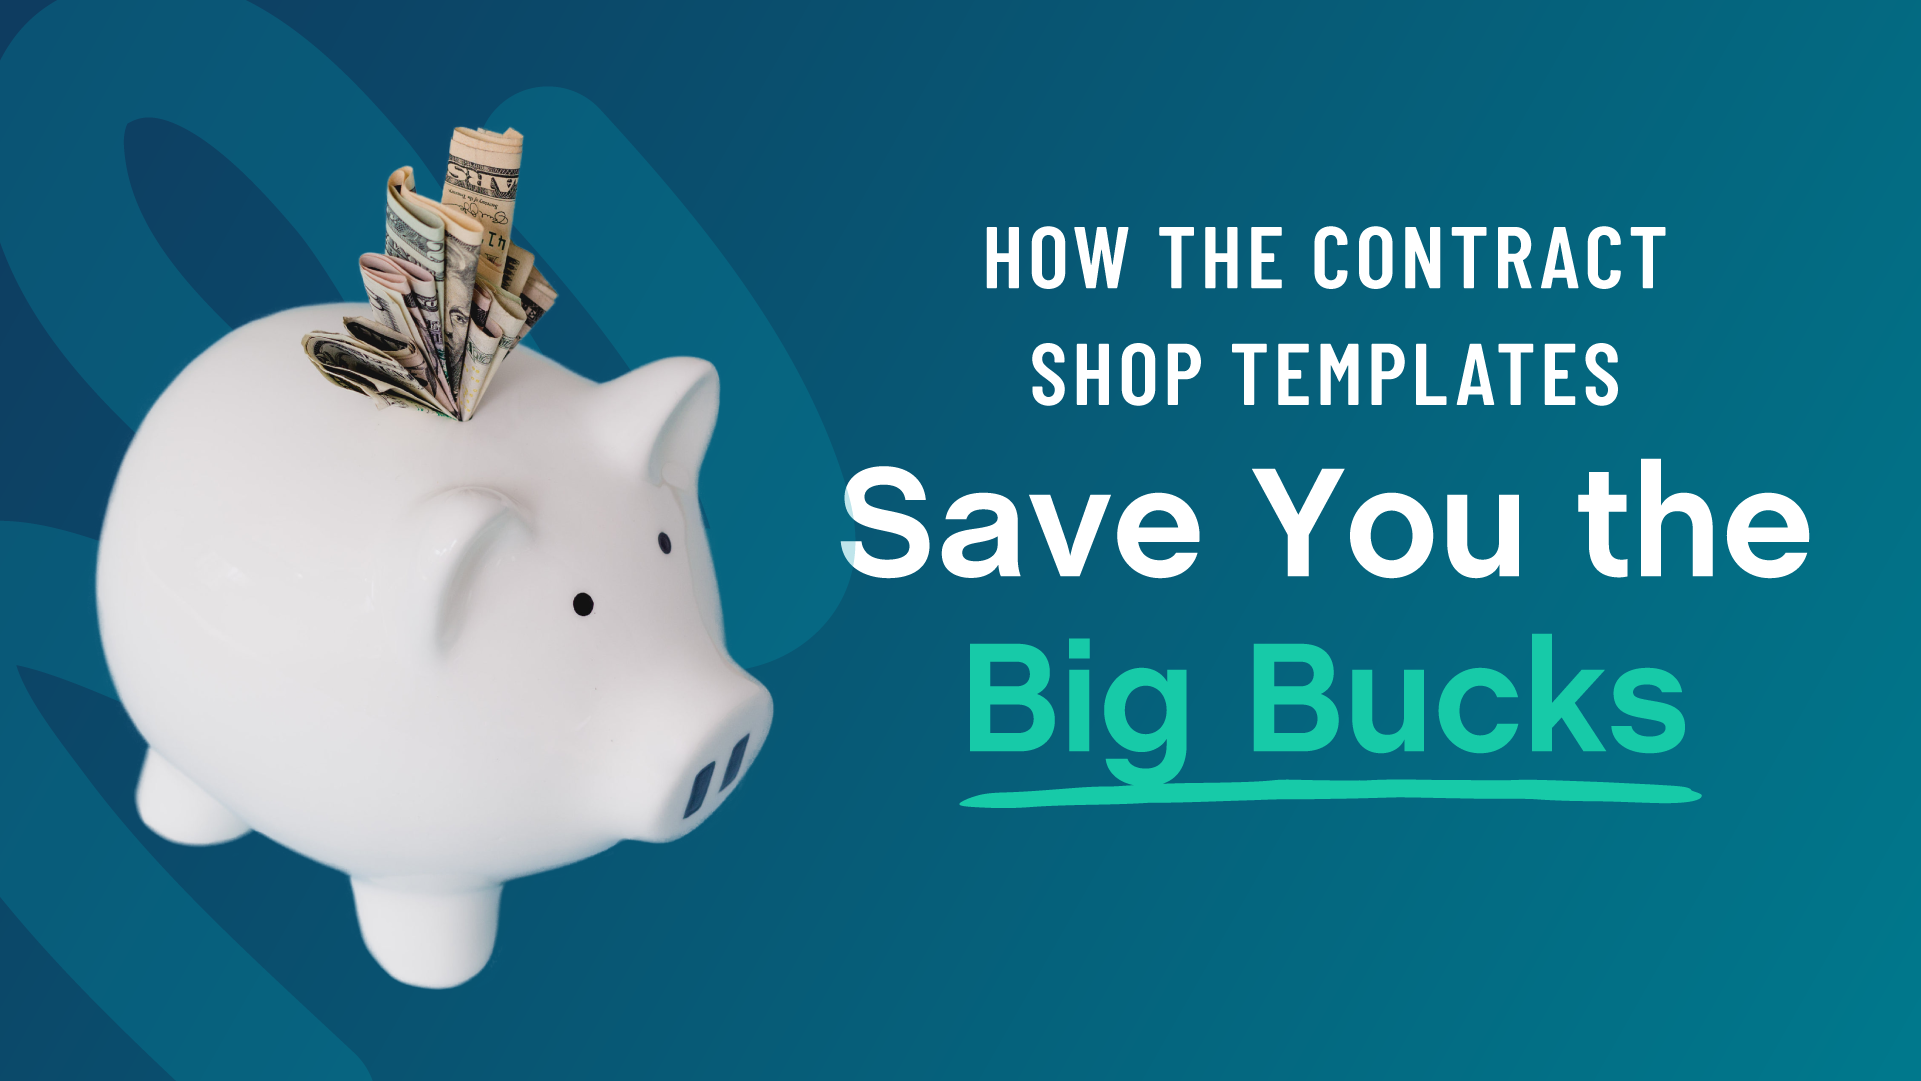 How the Contract Shop Templates Save You the Big Bucks